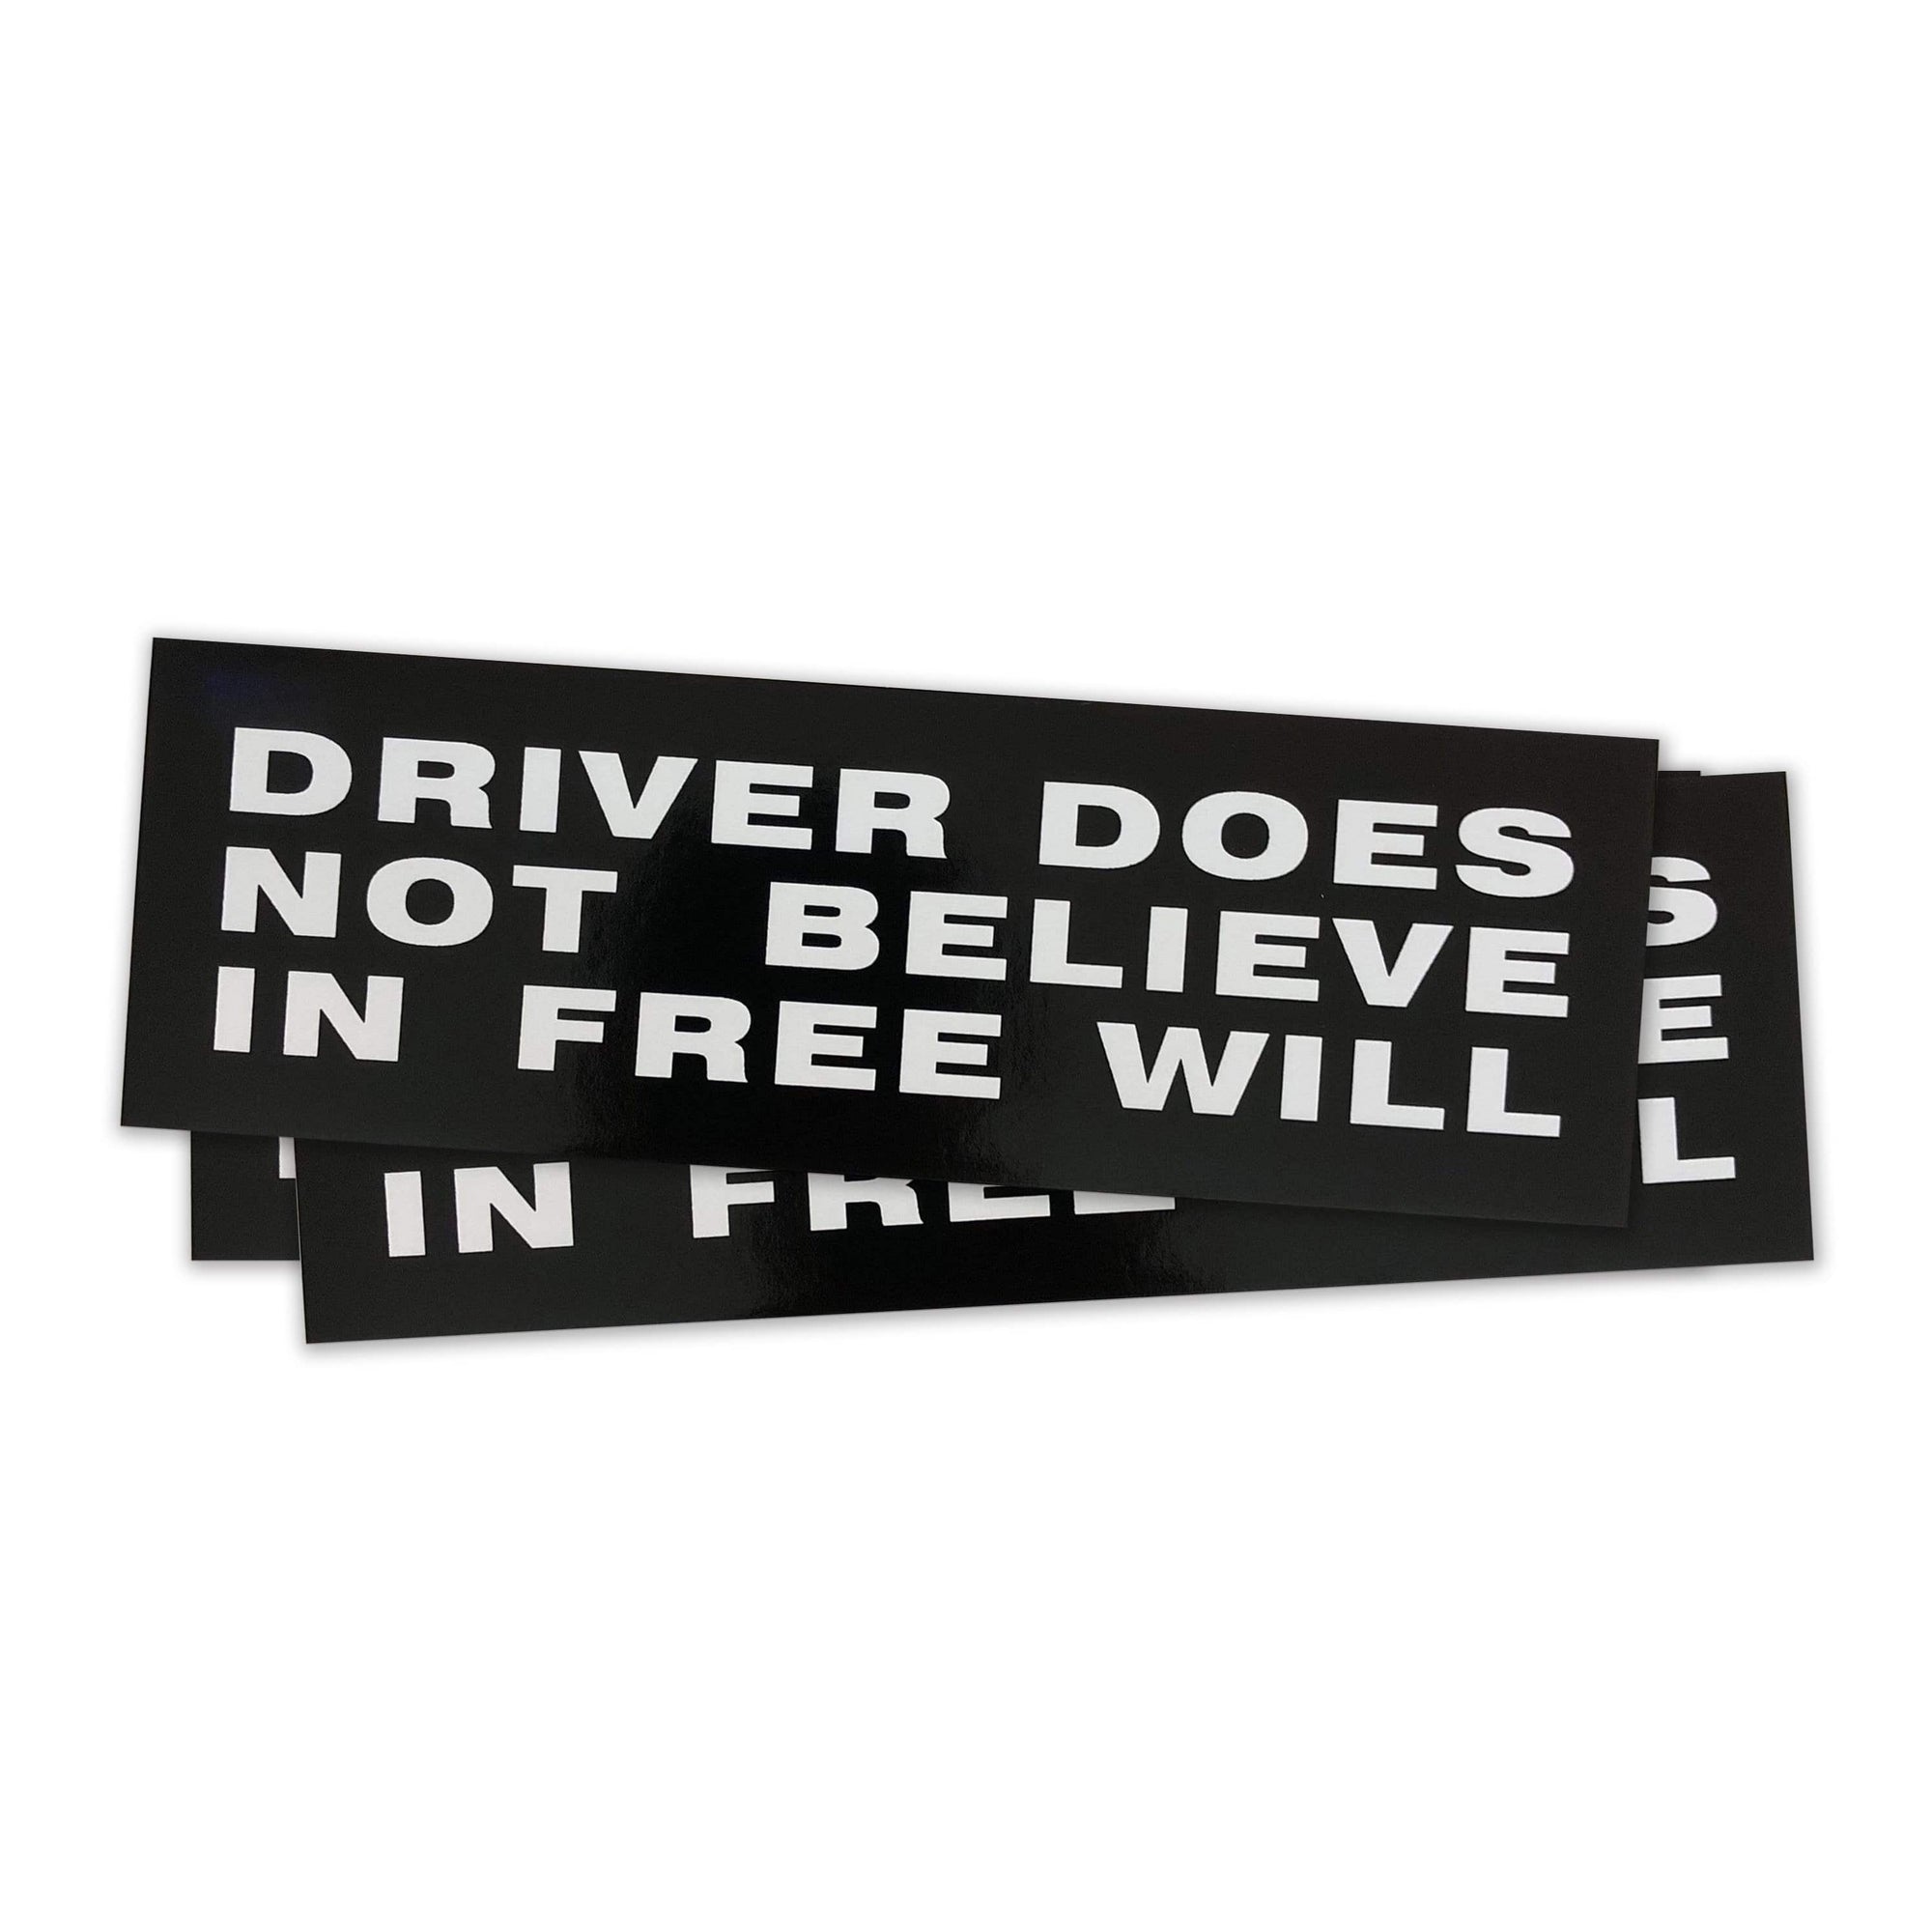 The Flenser Apparel Wreck and Reference "Does Not Believe In Free Will" Sticker